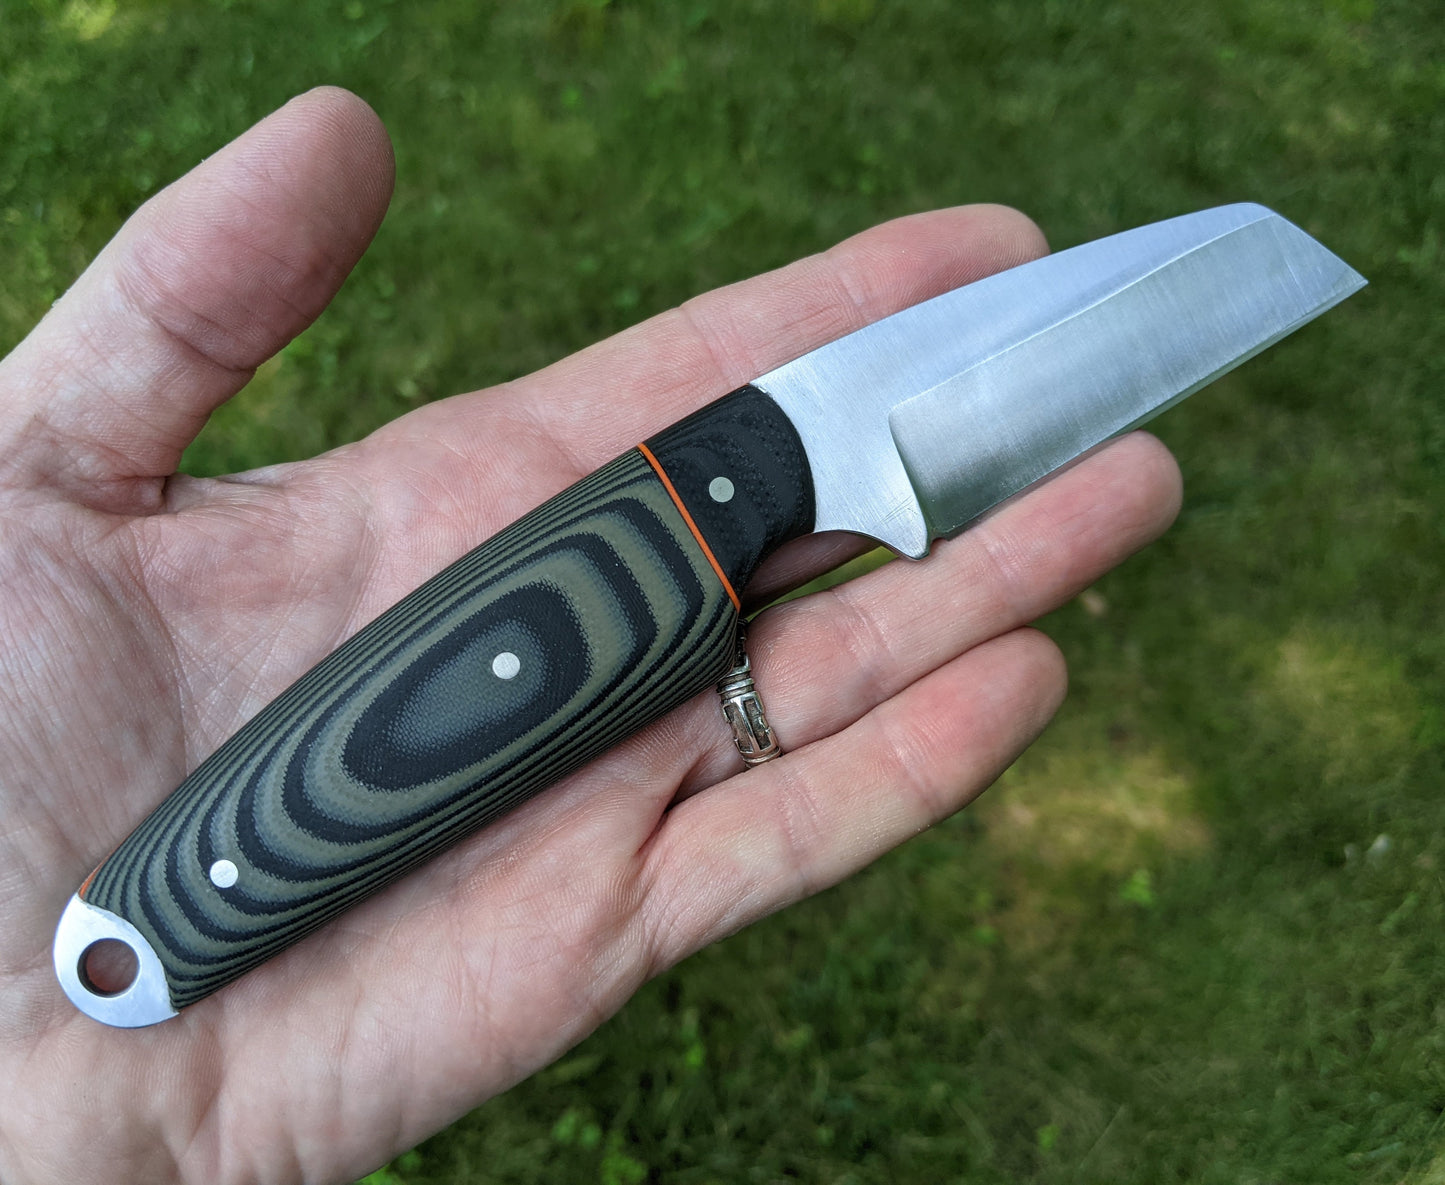 Sheepsfoot Work knife with SureTouch handle